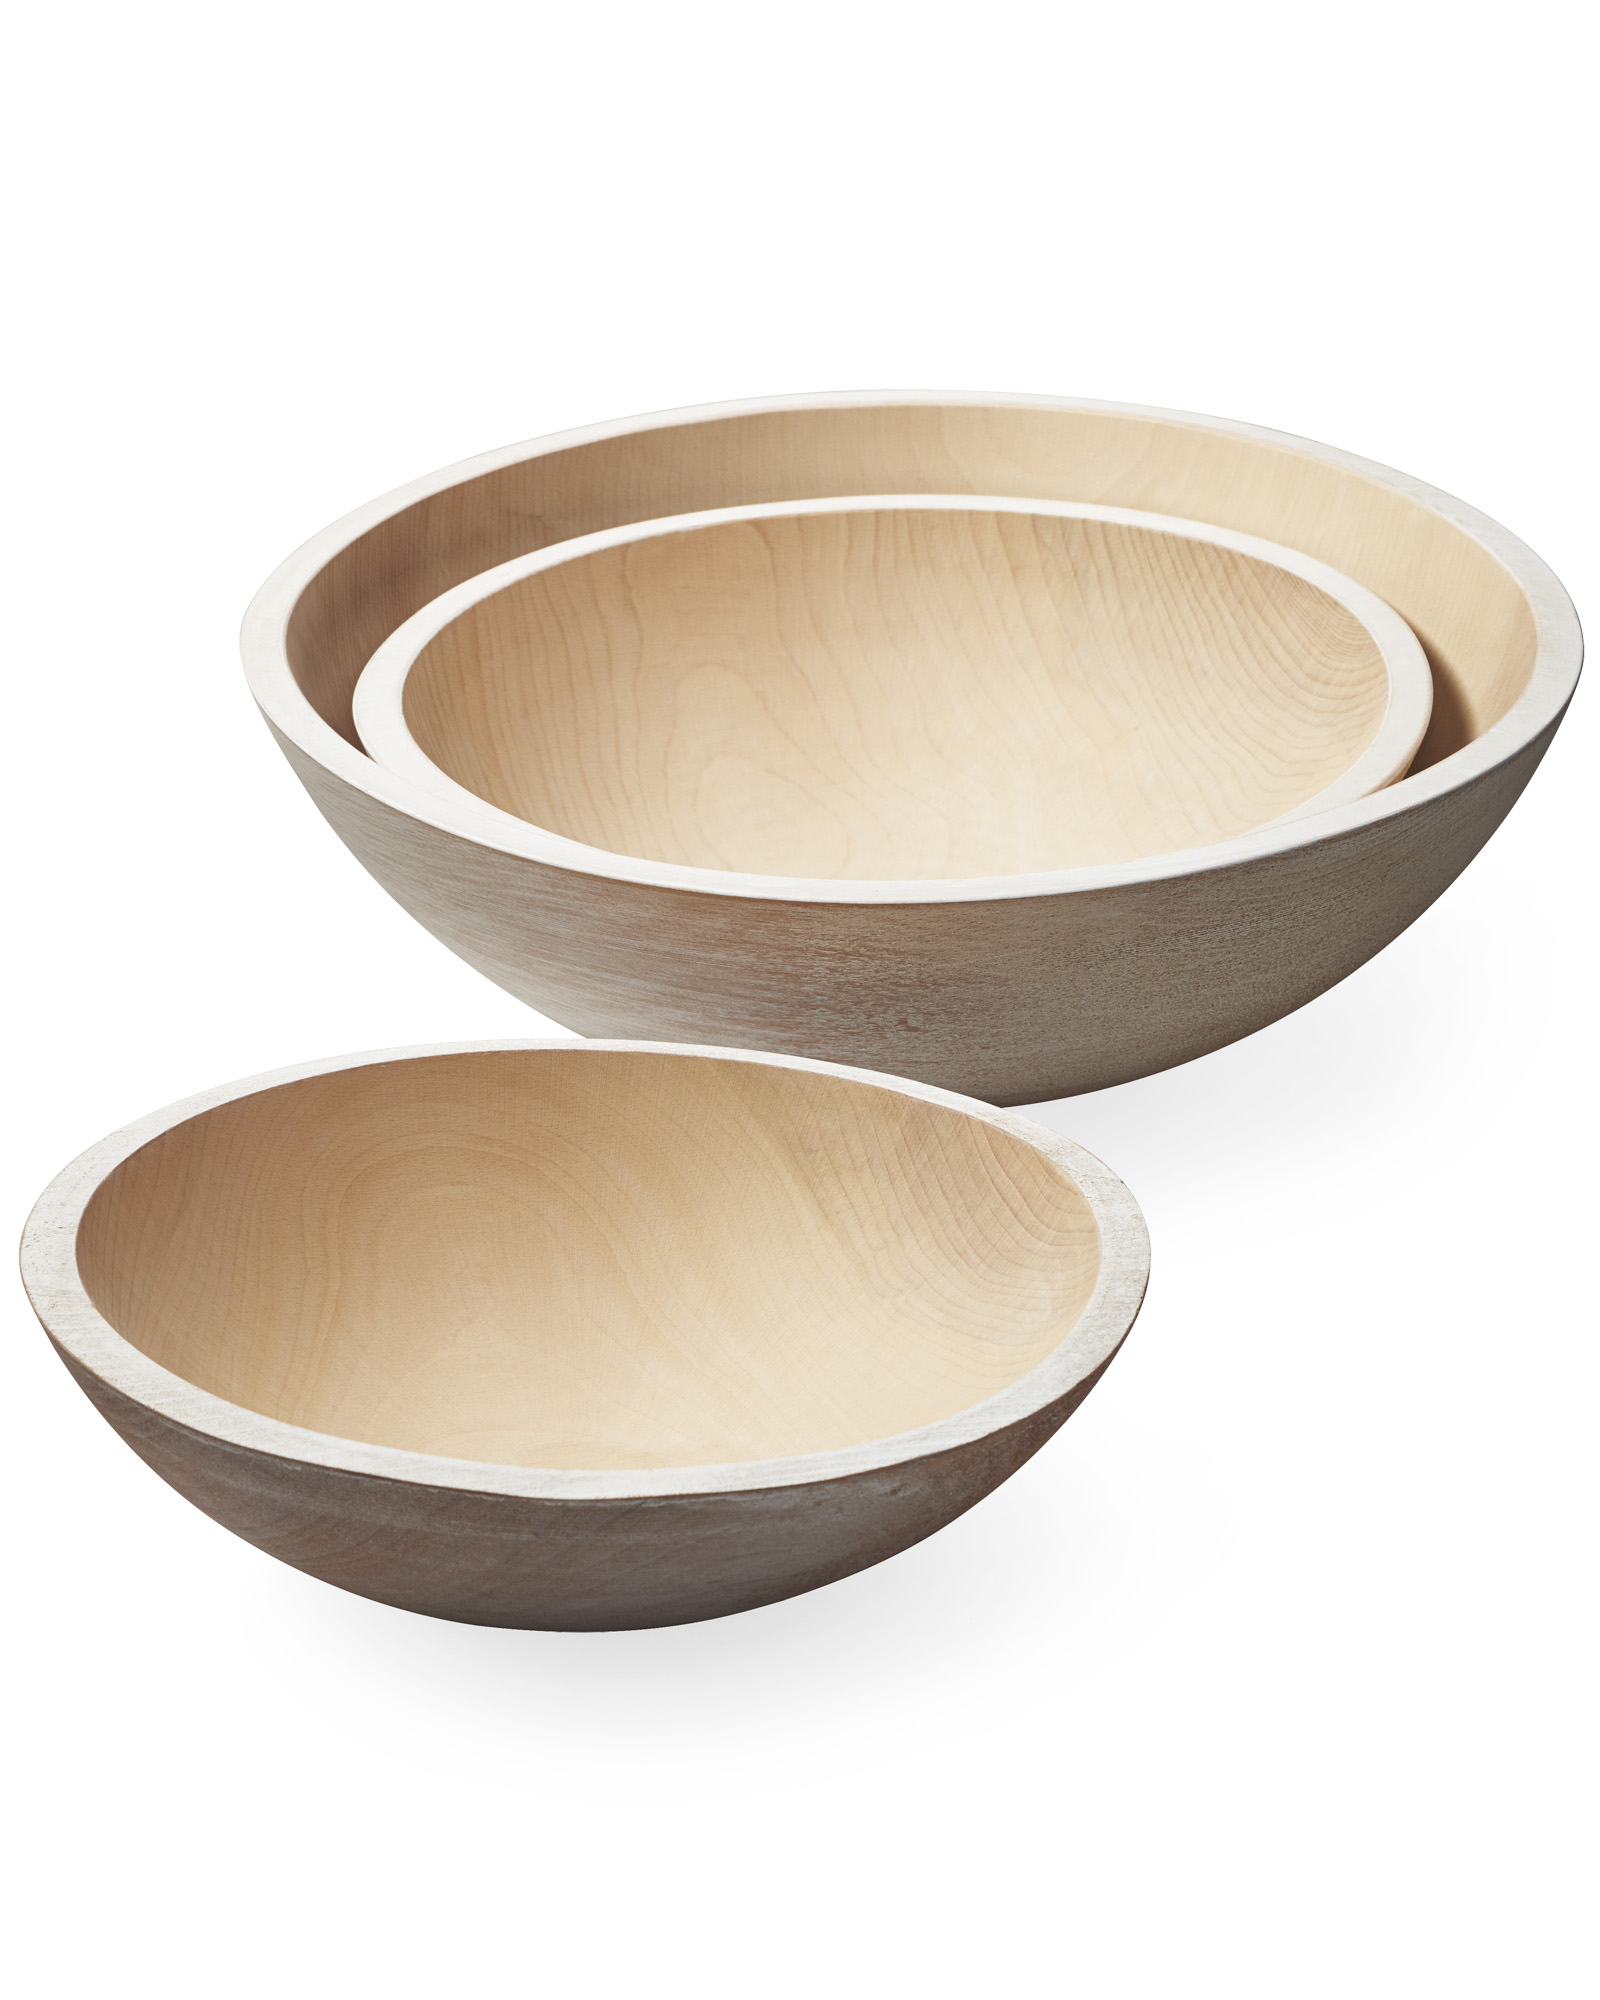 Farmhouse Pottery Wooden Peasant Bowl - Serena & Lily